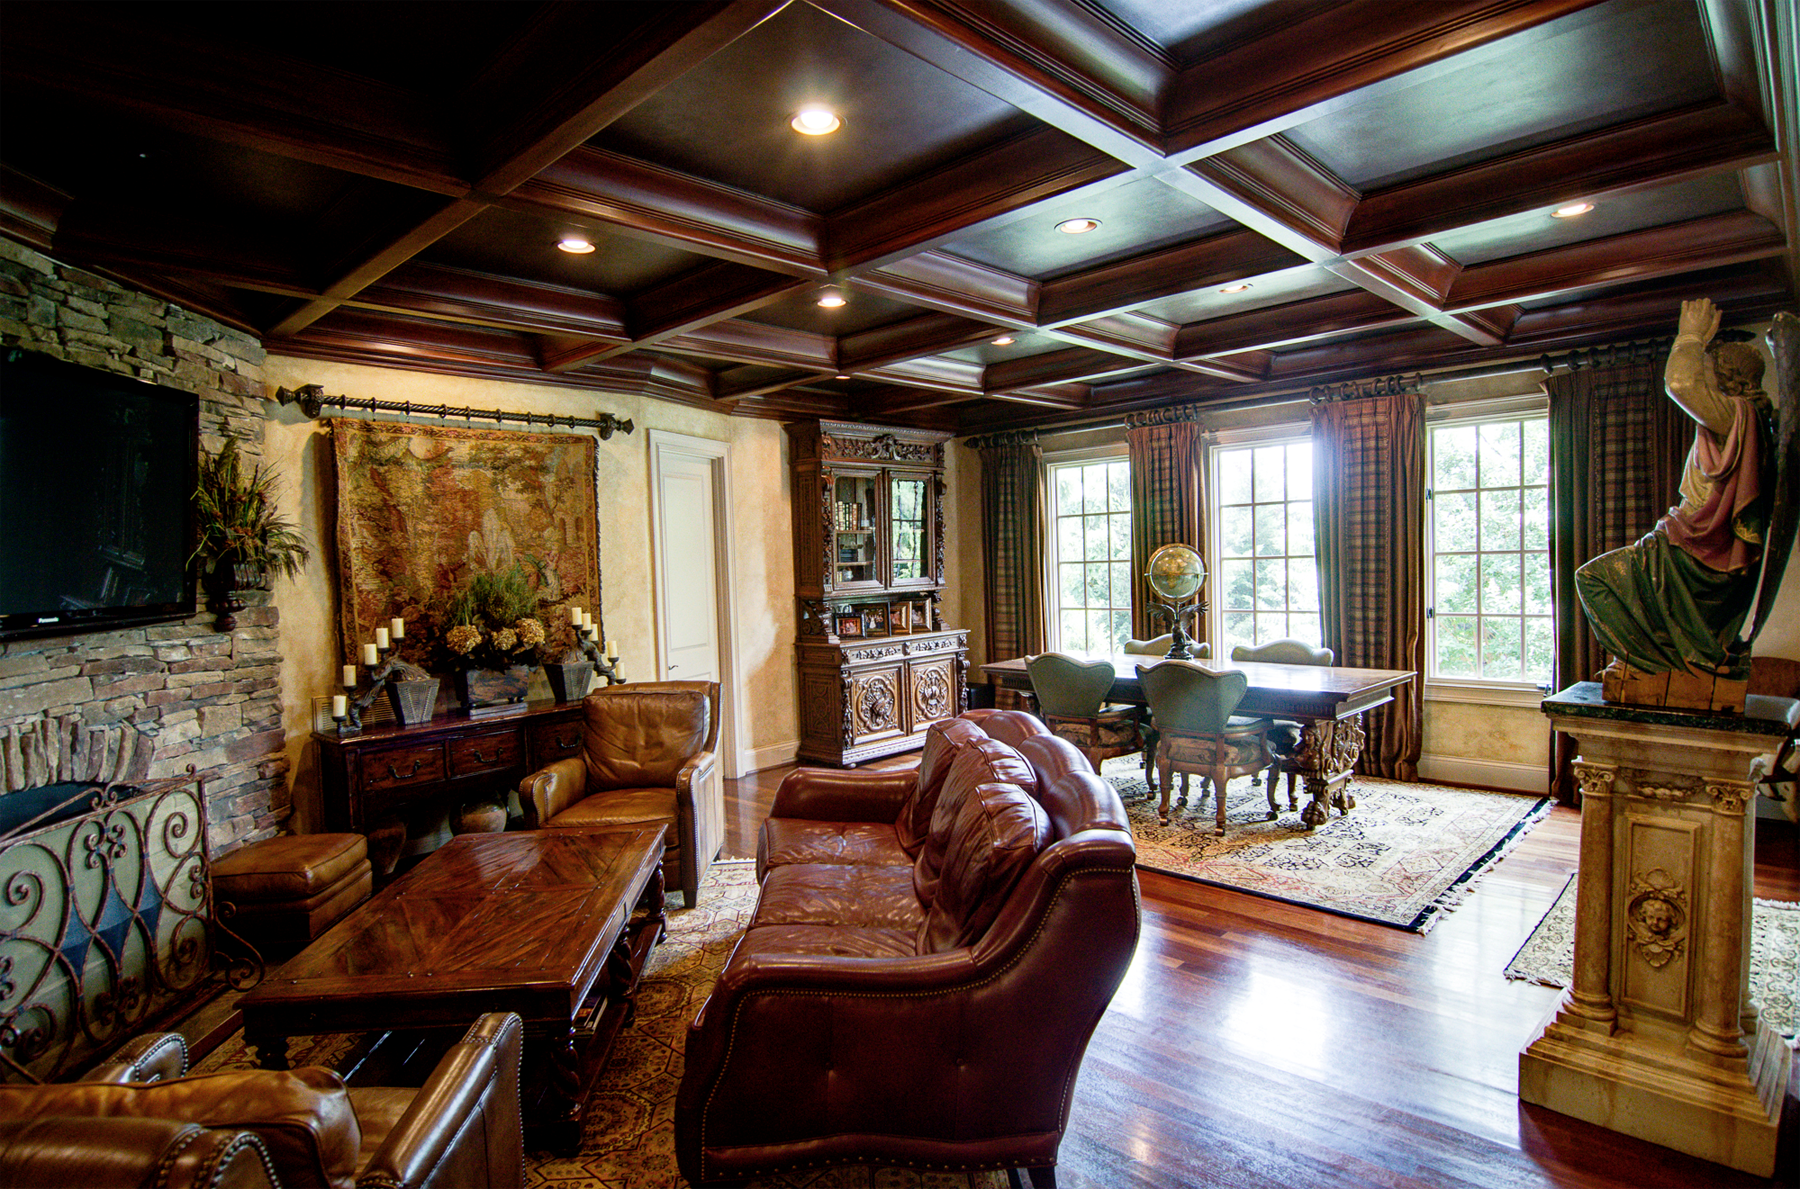 Wood grained coffer ceiling with faux metal inserts and Tuscan colored plaster walls.